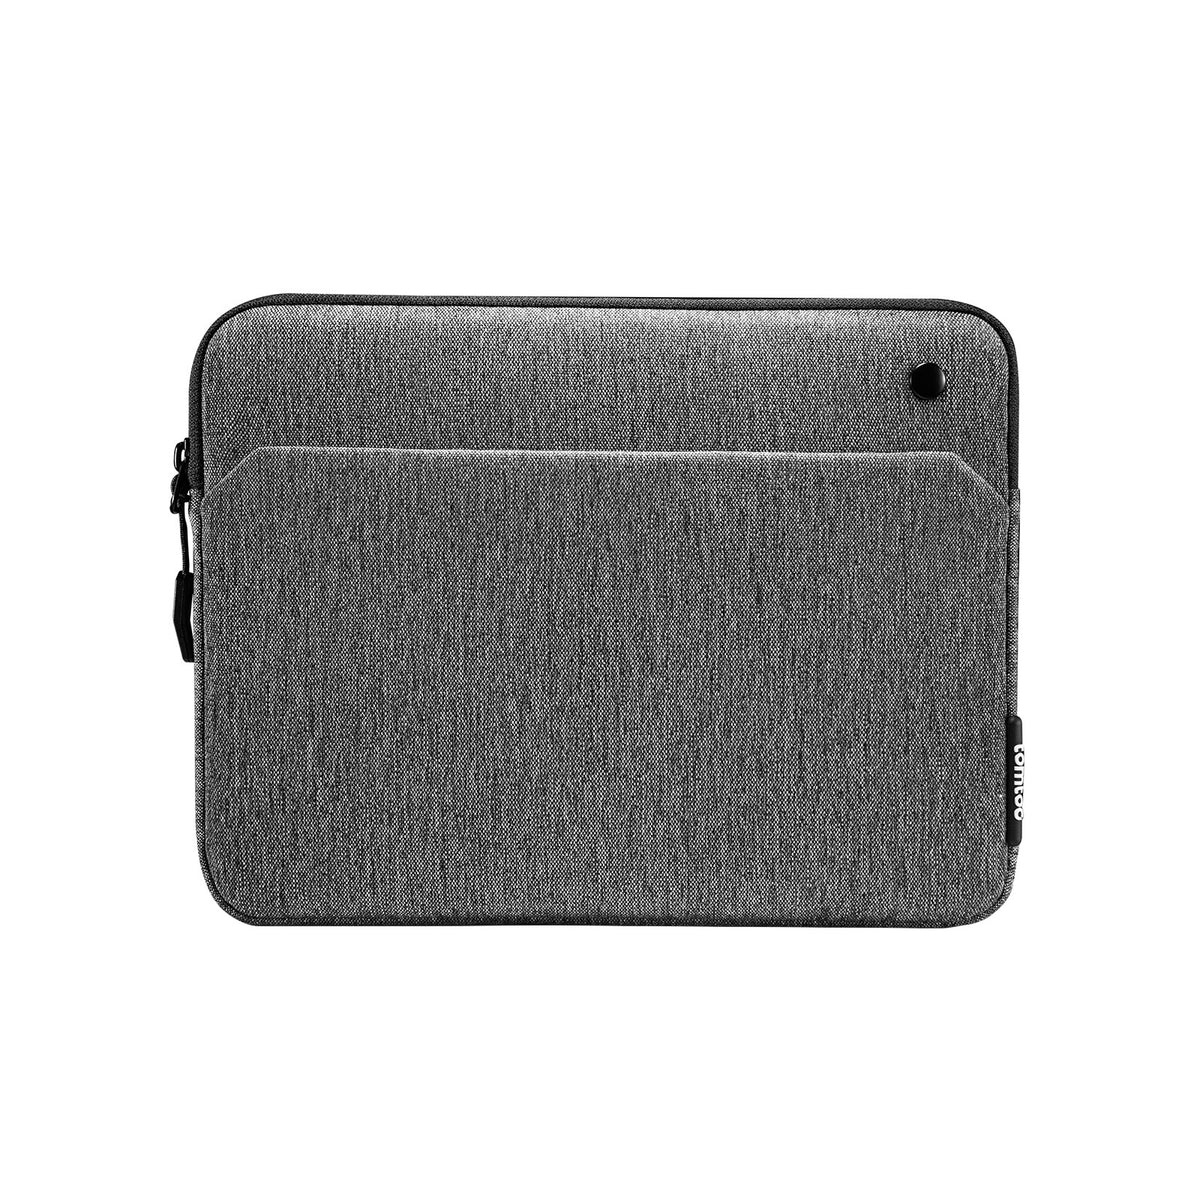 primary_Basic-A18 Tablet Sleeve for 12.9